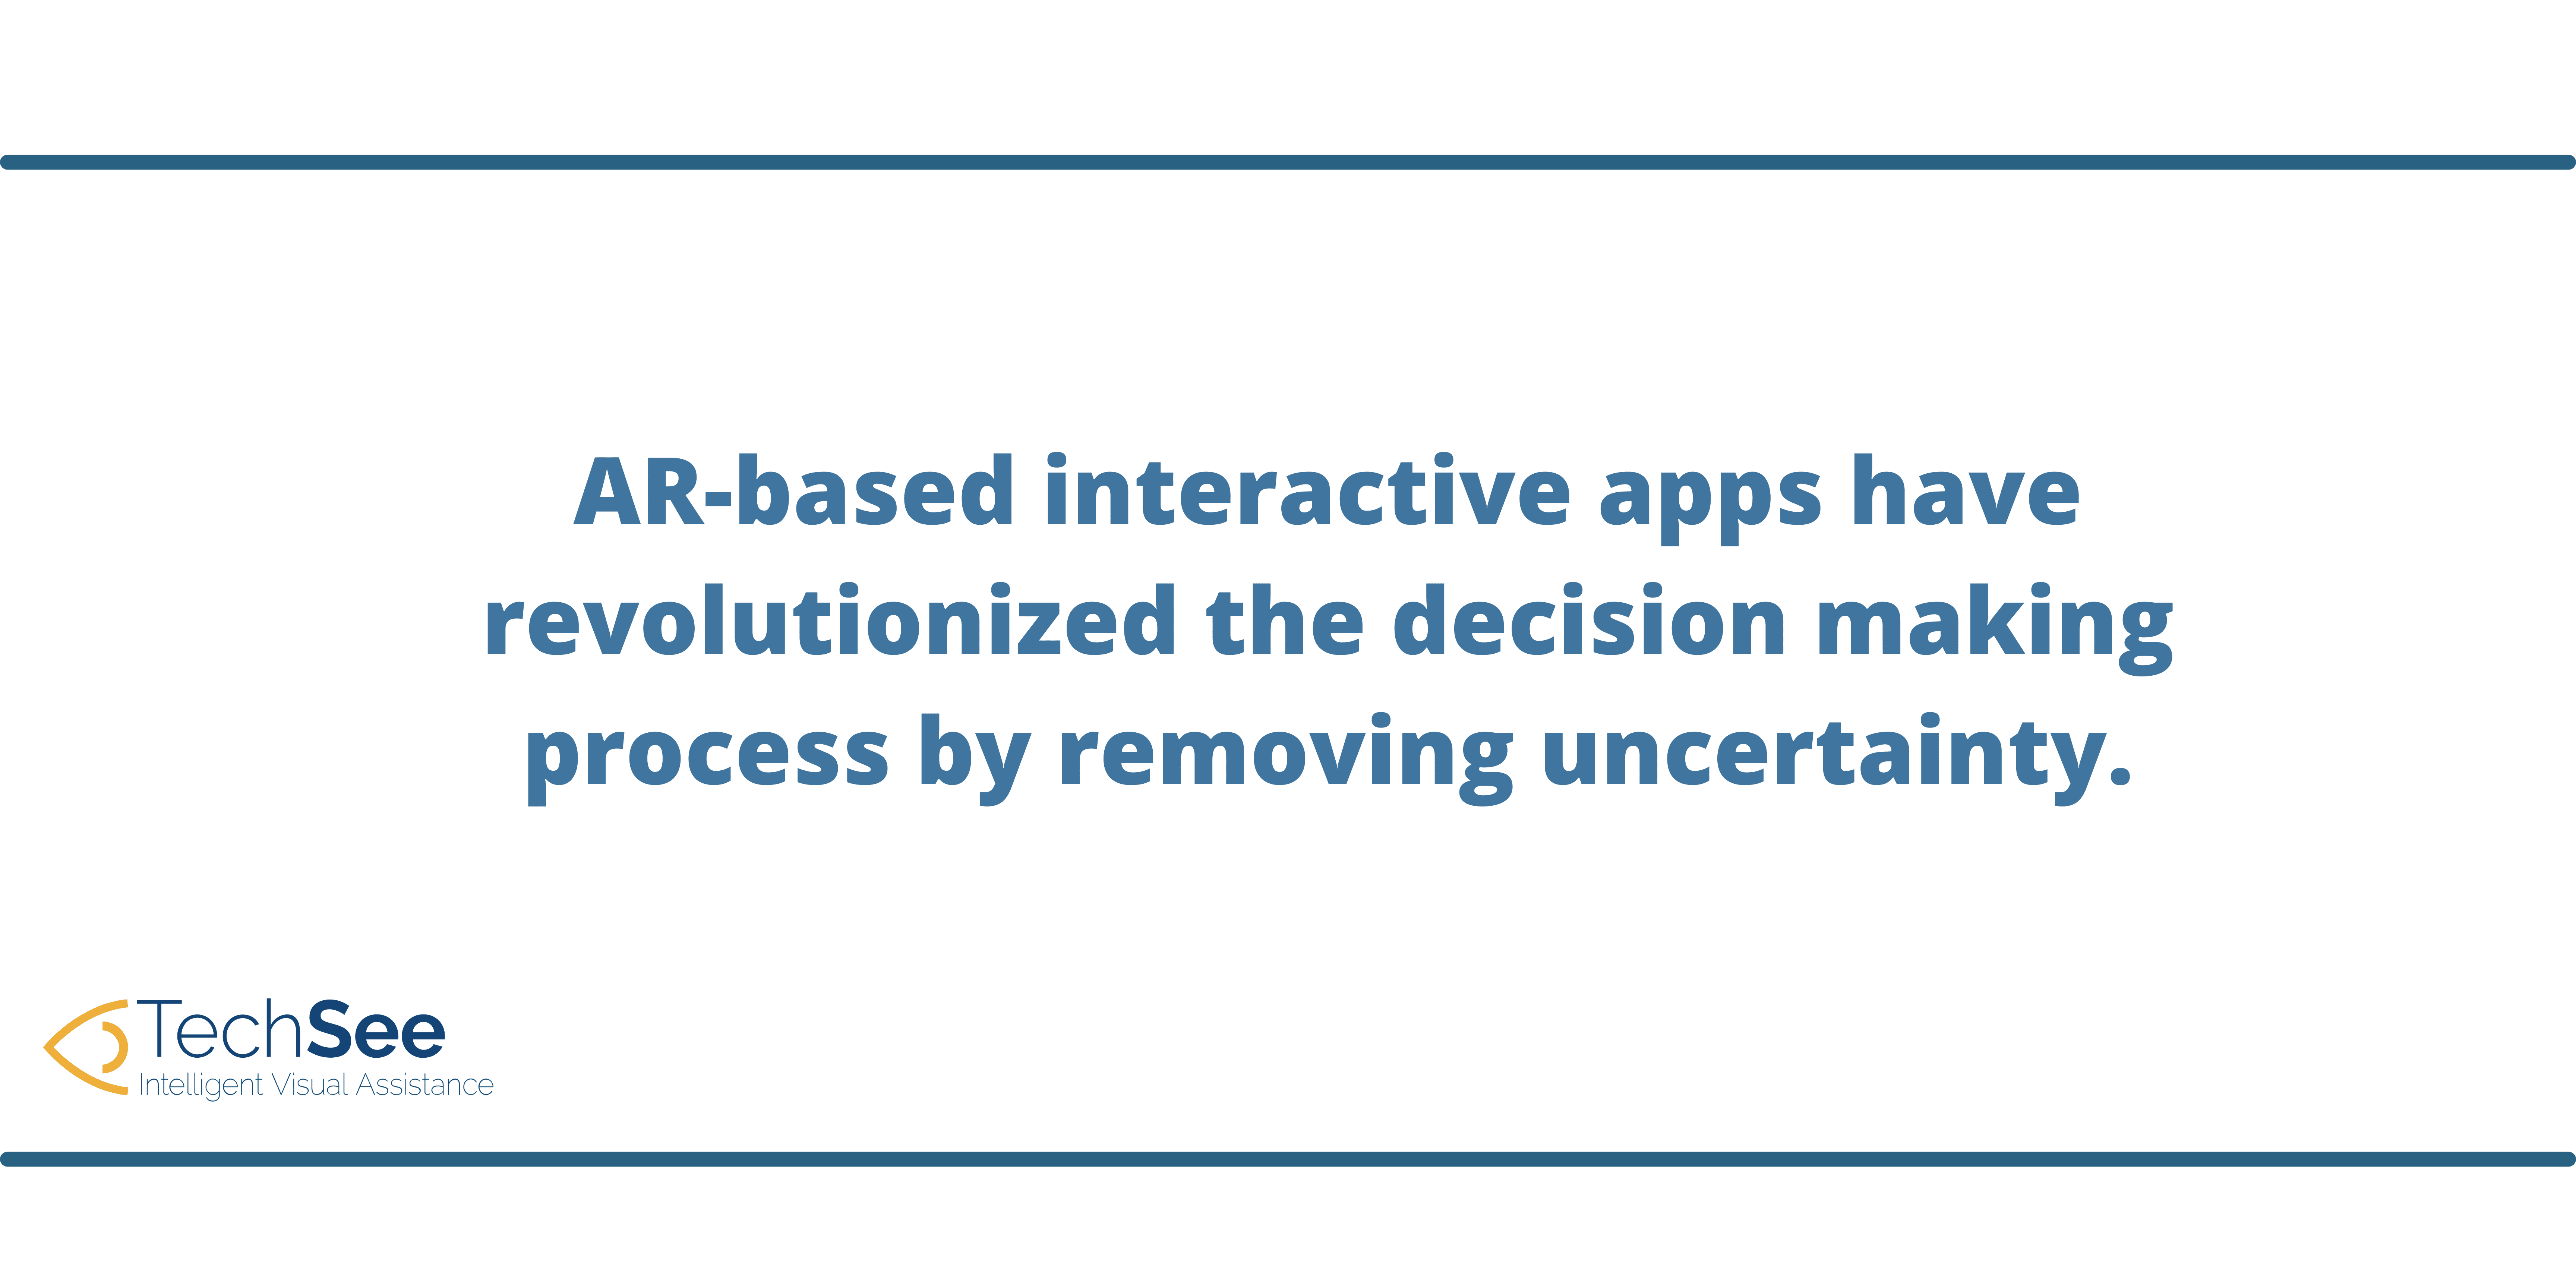 TechSee describes the transformation AR-based apps have made to the augmented reality customer experience.